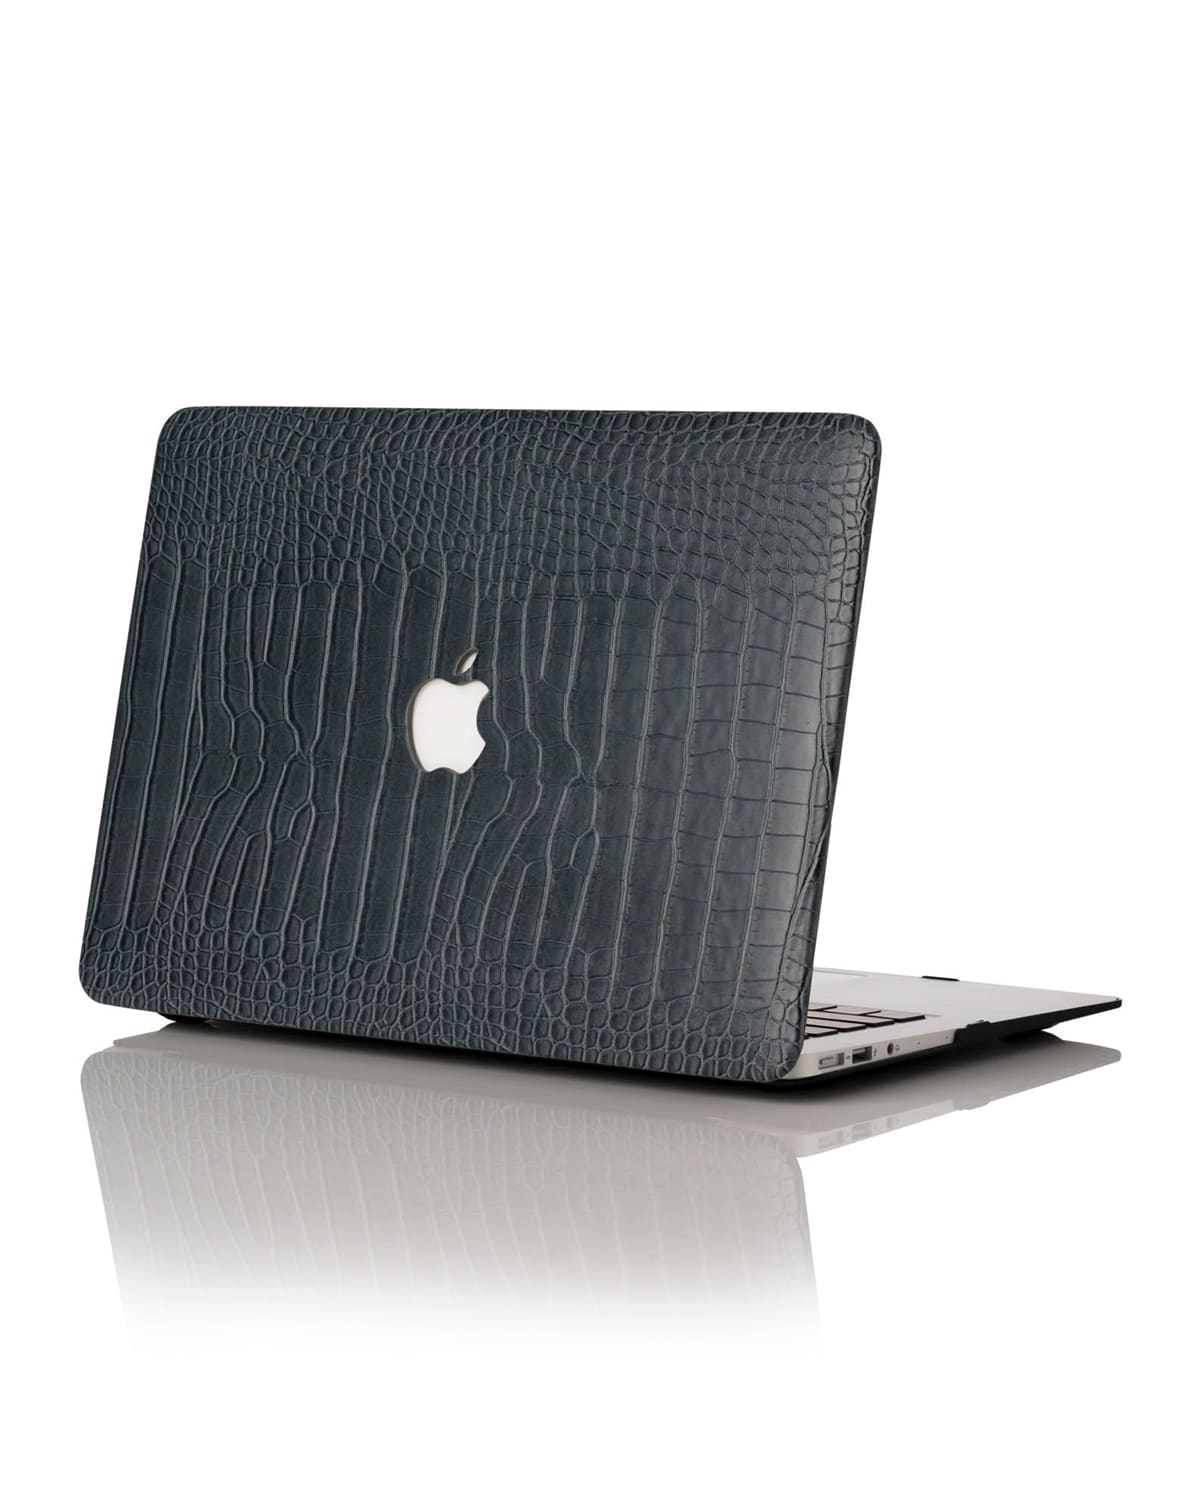 Chic Geeks Faux Crocodile 13" New Macbook Air Case (model Number A1932) In Charcoal